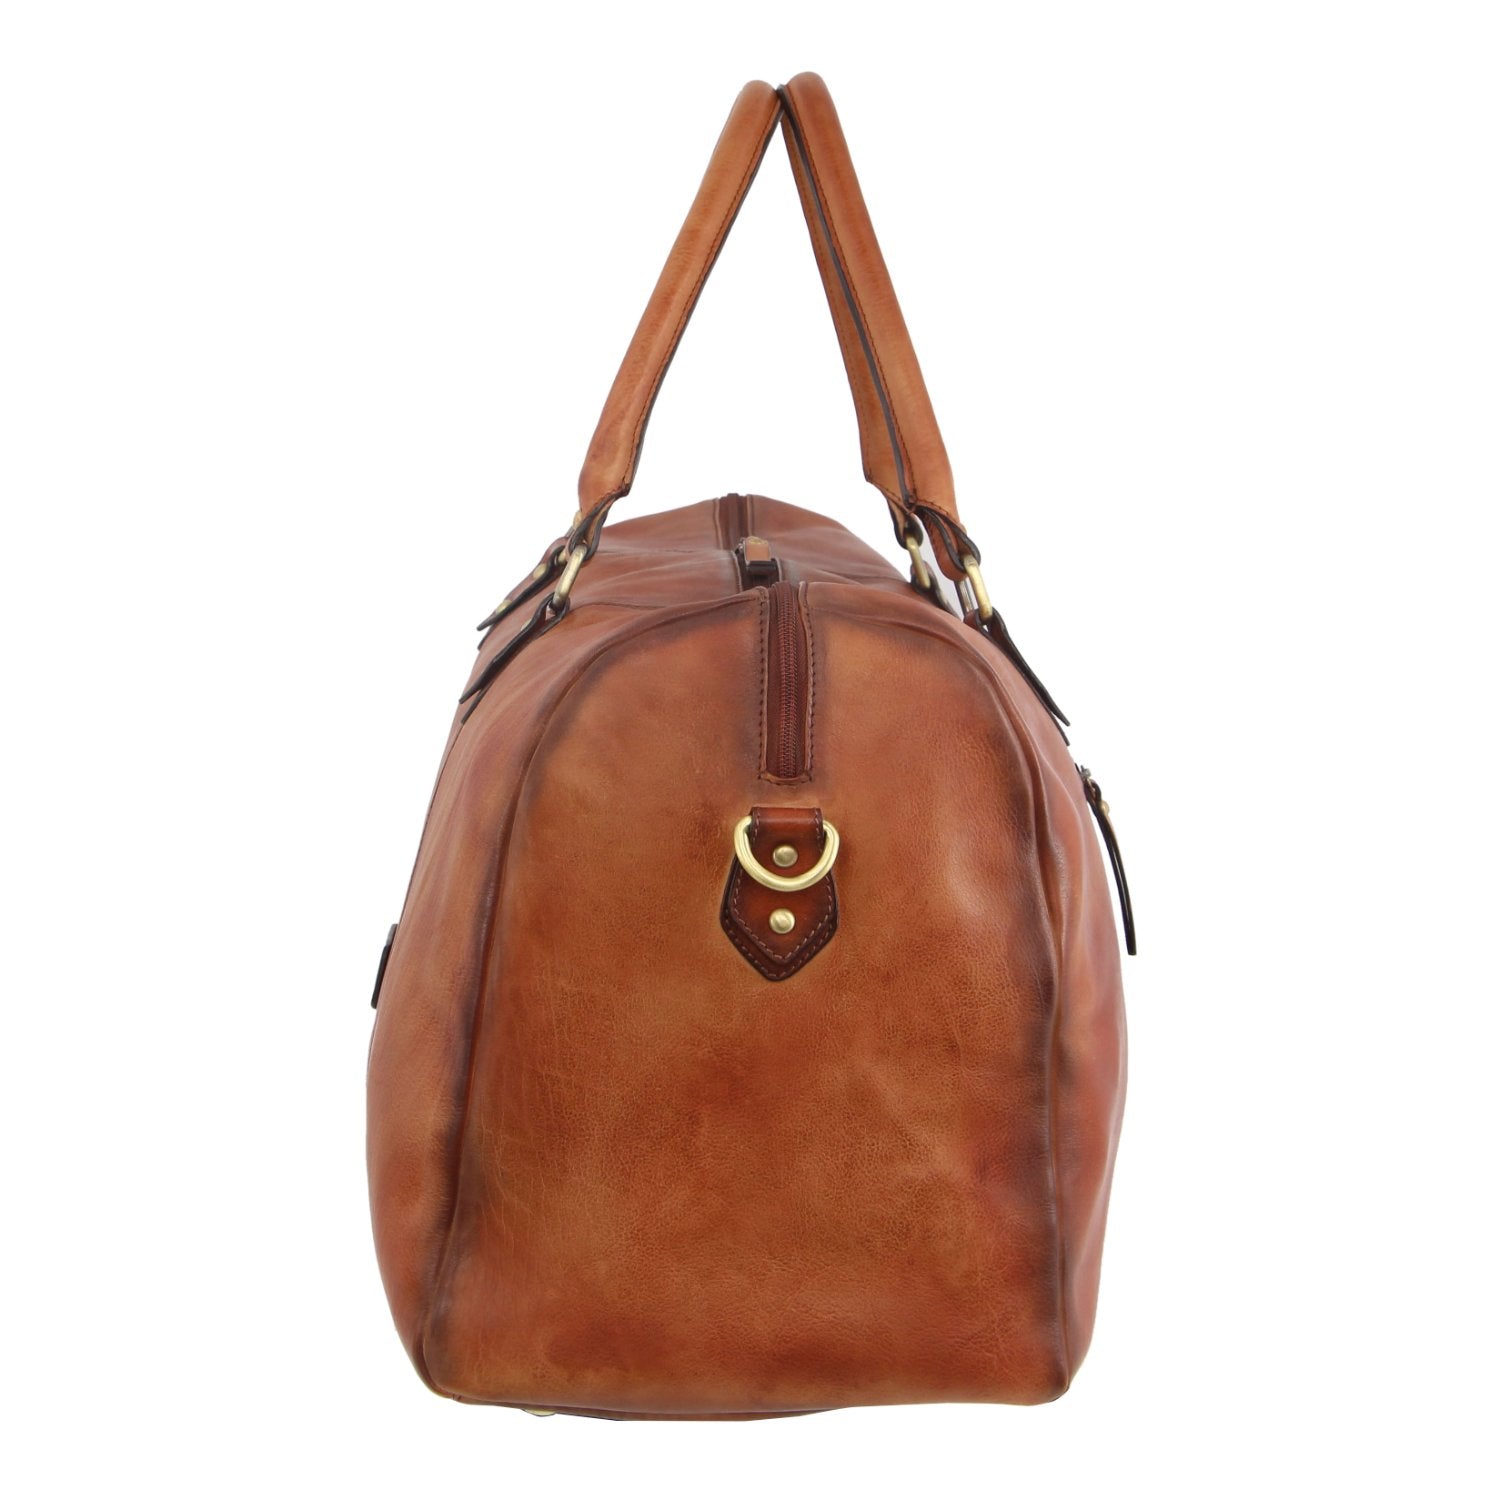 Pierre Cardin Smooth Leather Overnight Bag in Cognac